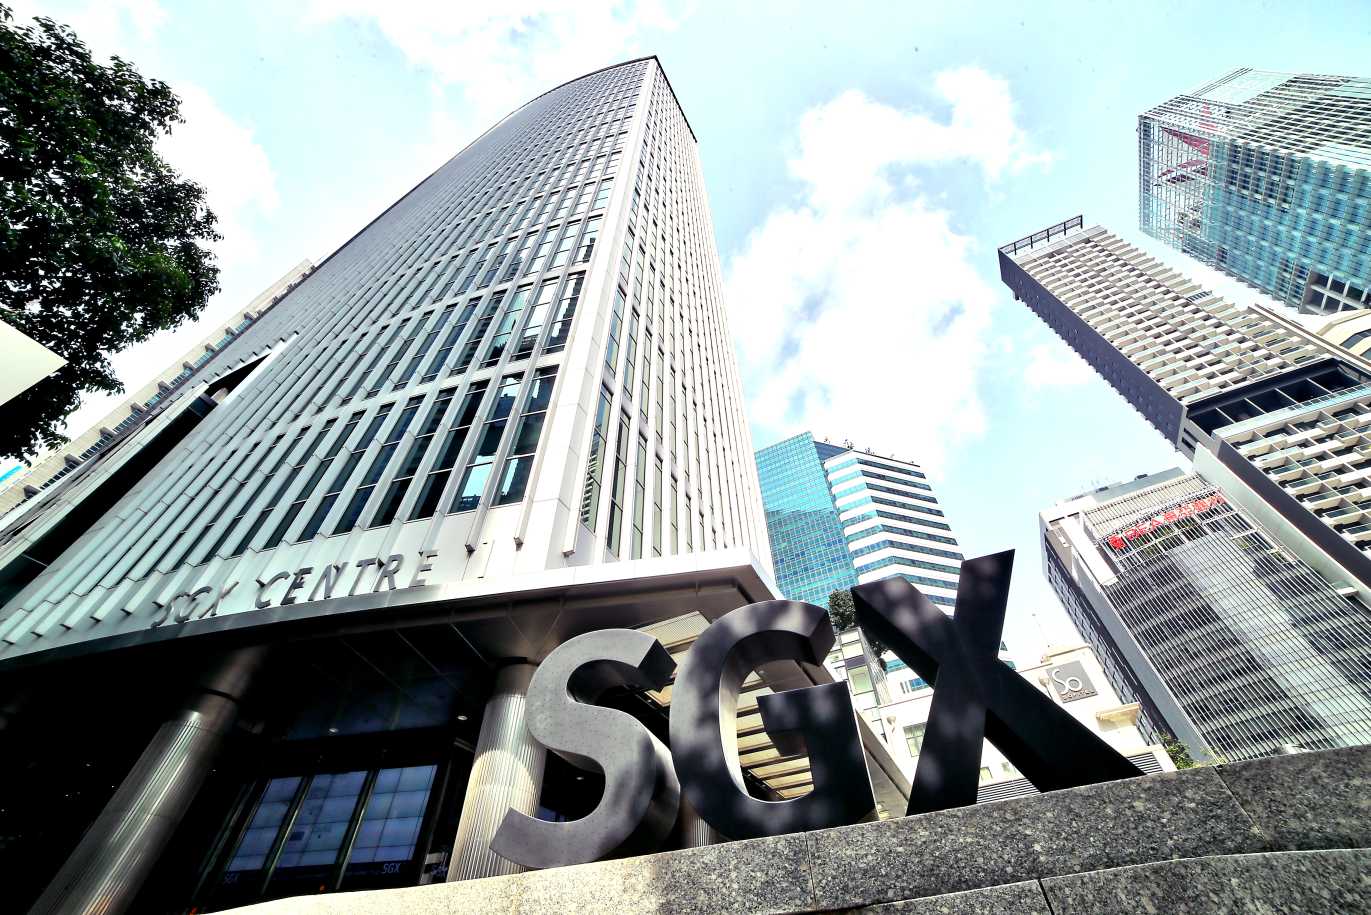 FX Demand on Singapore Exchange Rises in October 2021